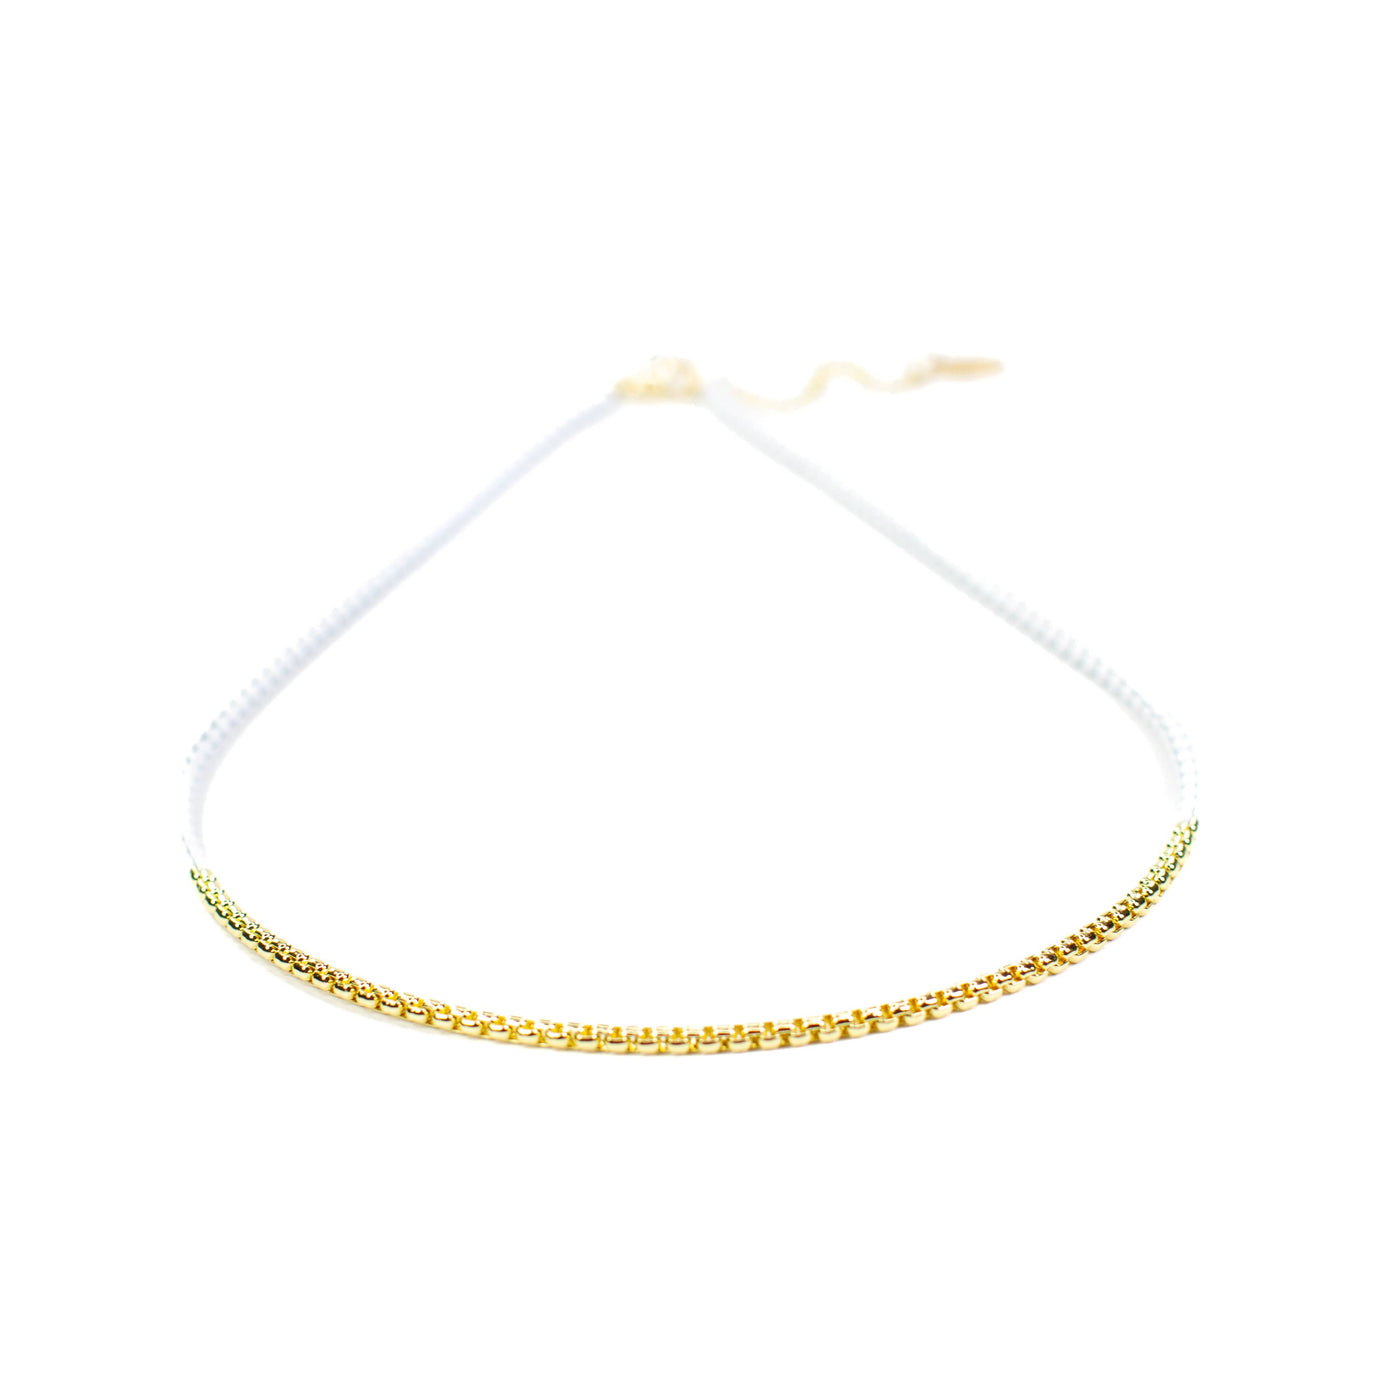 Chain & Gold Link Necklace - White